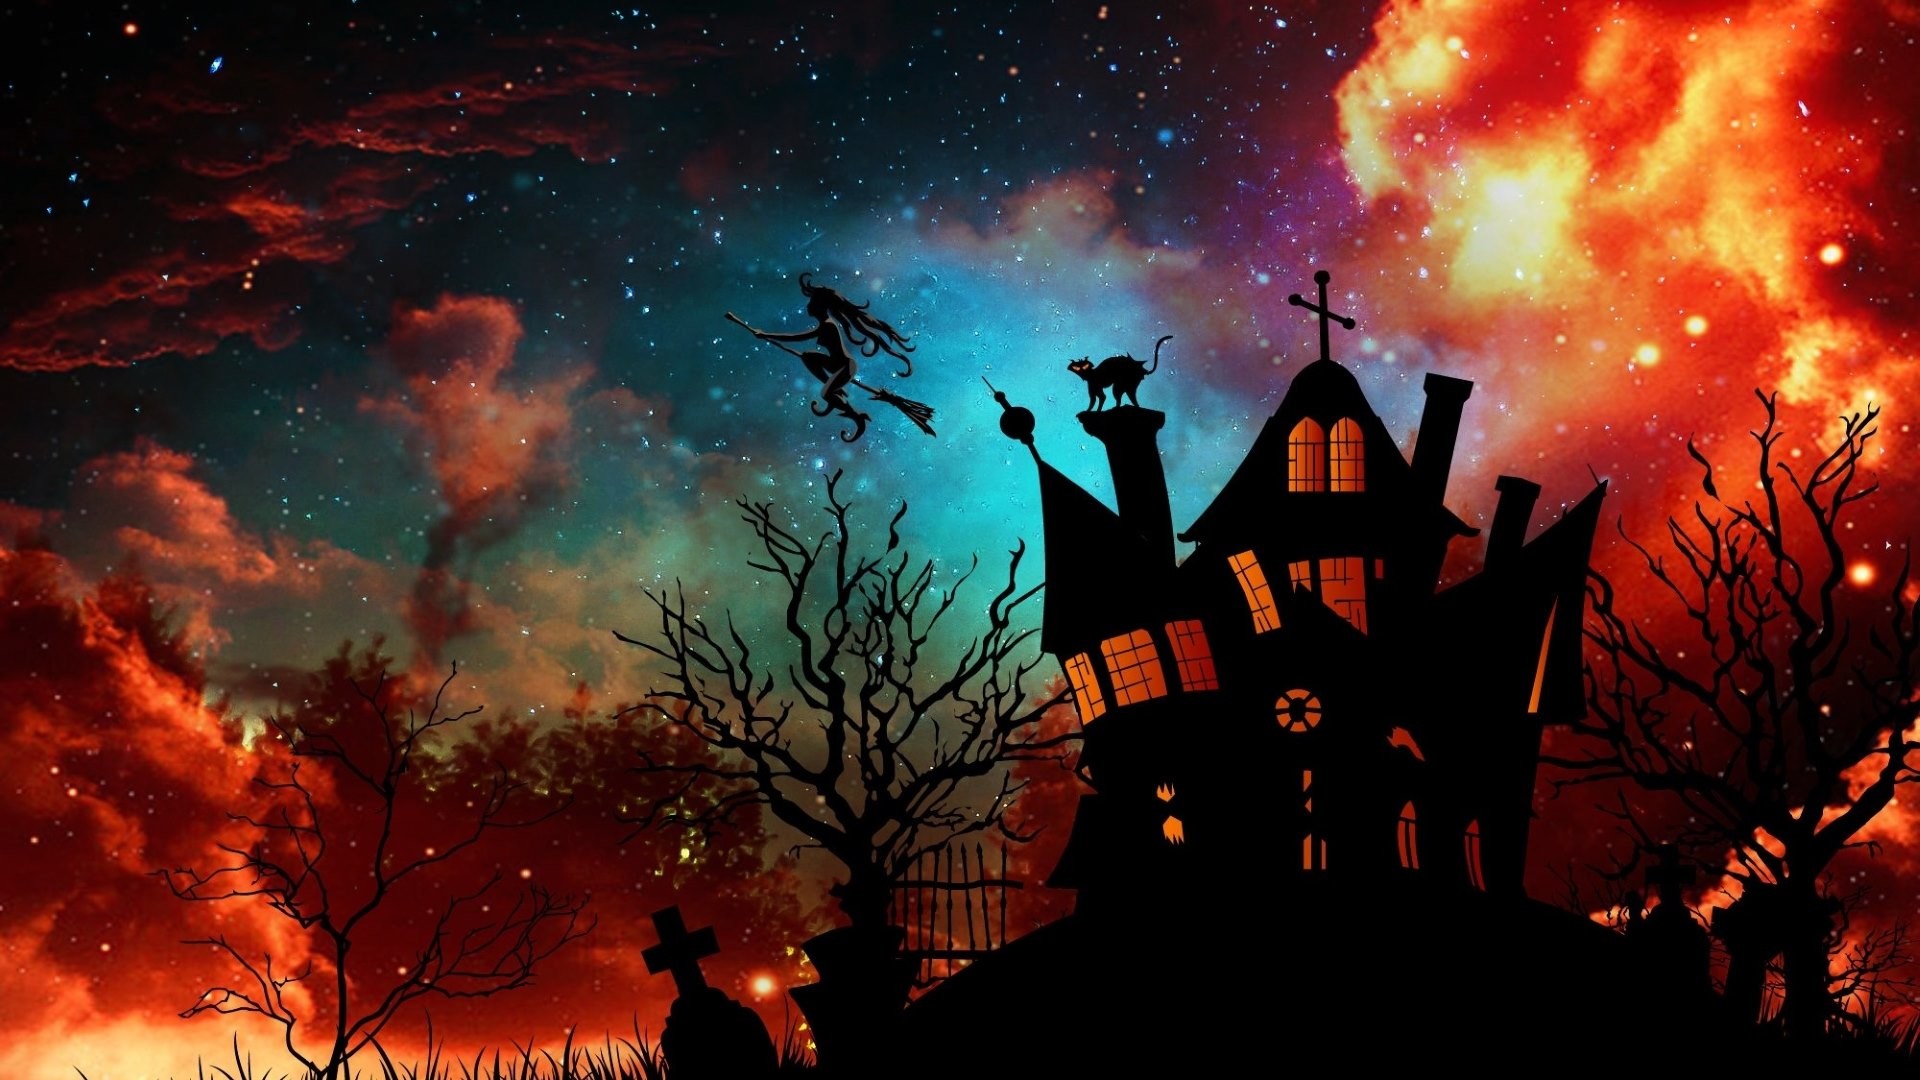 1920x1080 Super genuine free image for Halloween holiday featured free under CC0  license by courtesy of Anja Osenberg Â· Save the Halloween wallpaper in HD  and wide ...